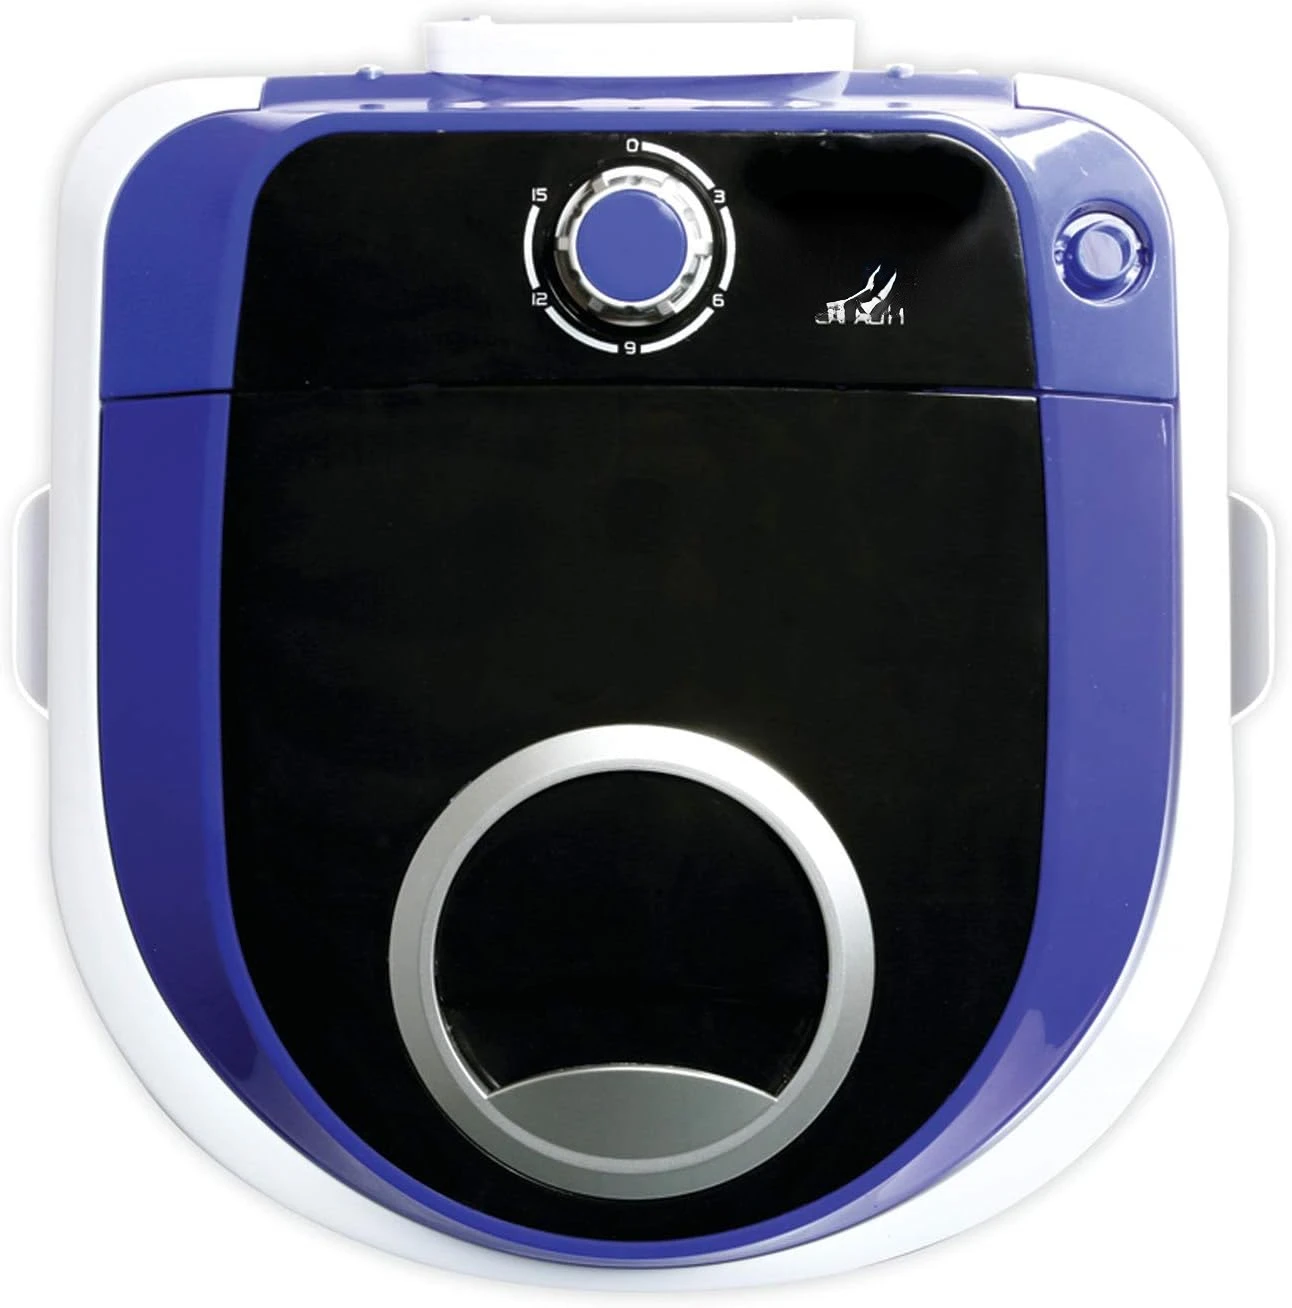 

Version Portable Washer - Top Loader Portable Laundry, Mini Washing Machine, Quiet Washer, Rotary Controller, 110V - For Compact